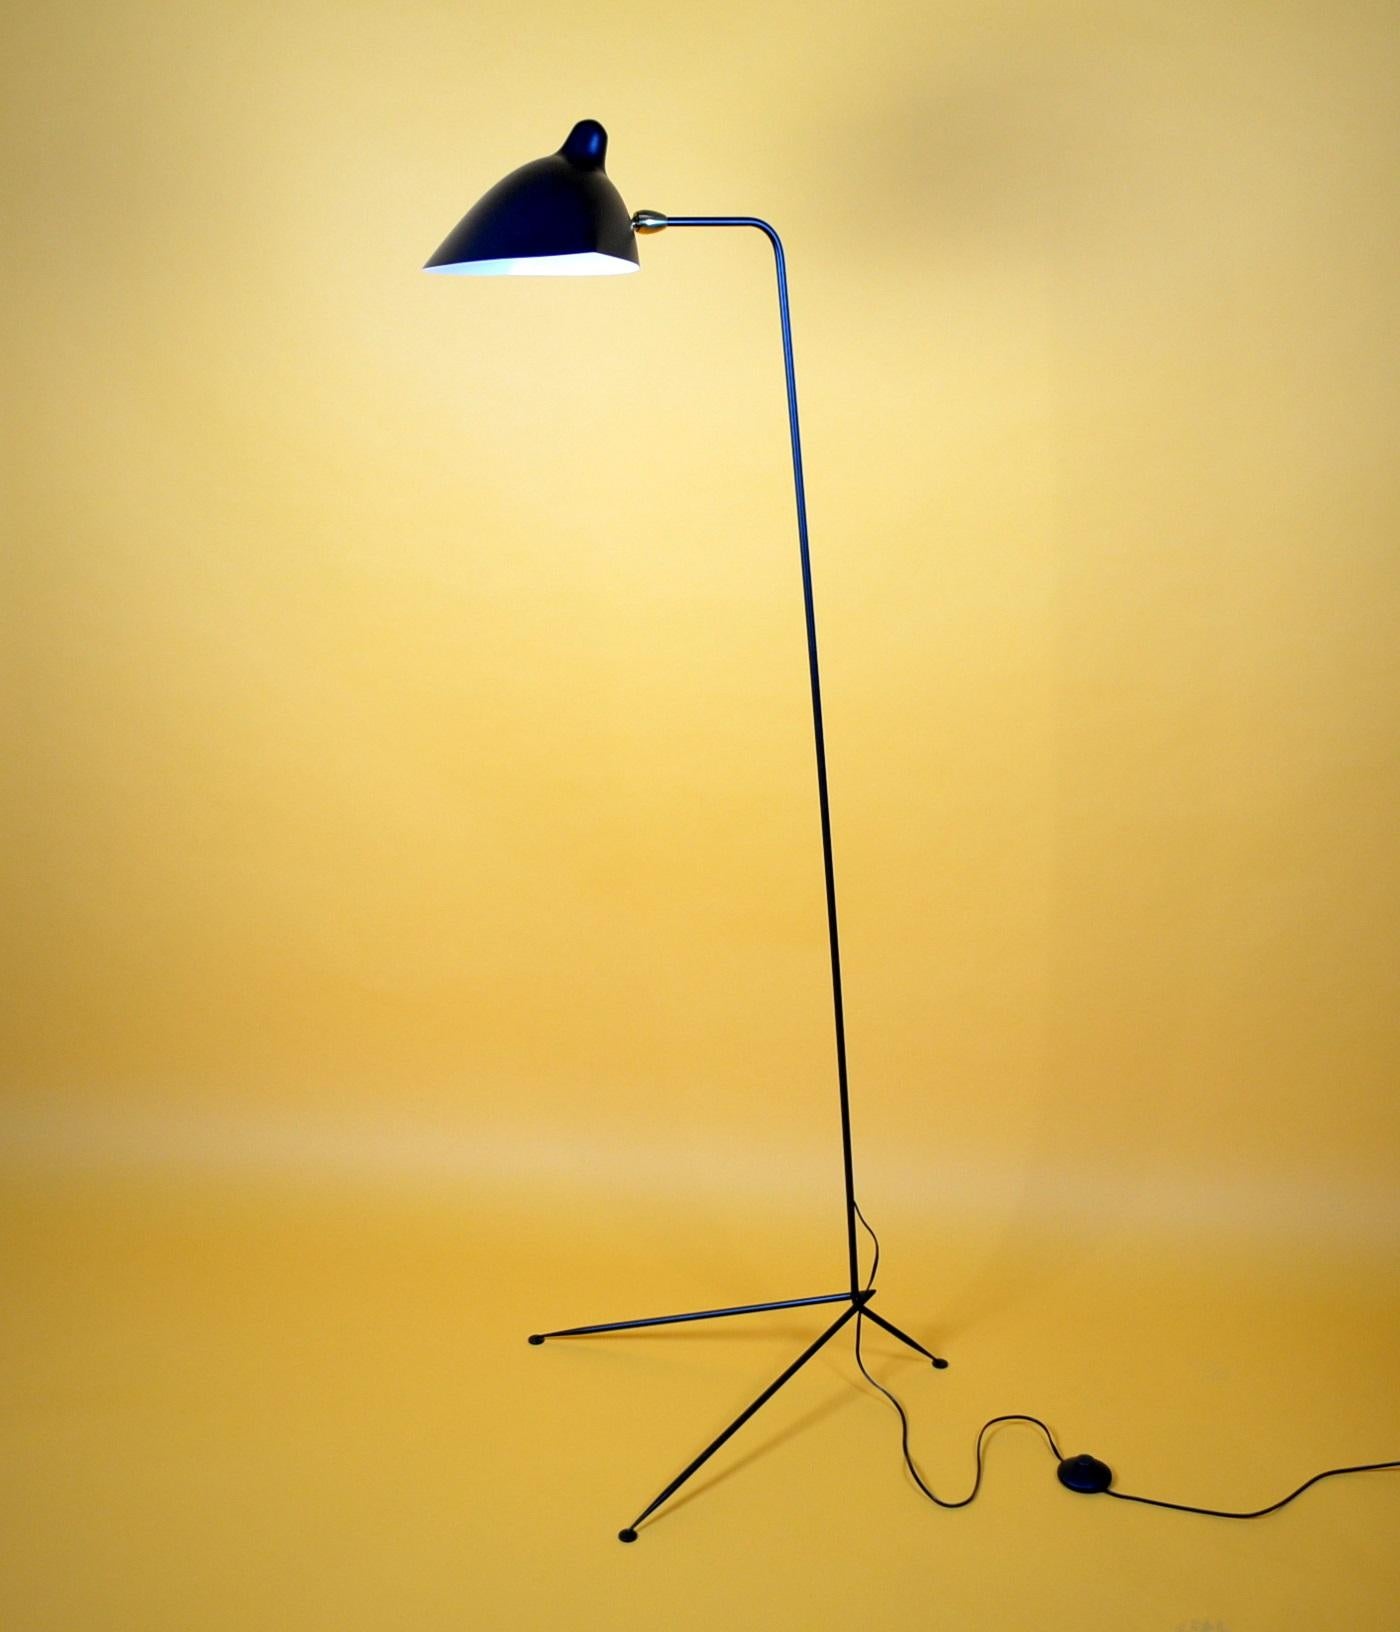 Mid-Century Modern Standing One-Arm Lamp by Serge Mouille